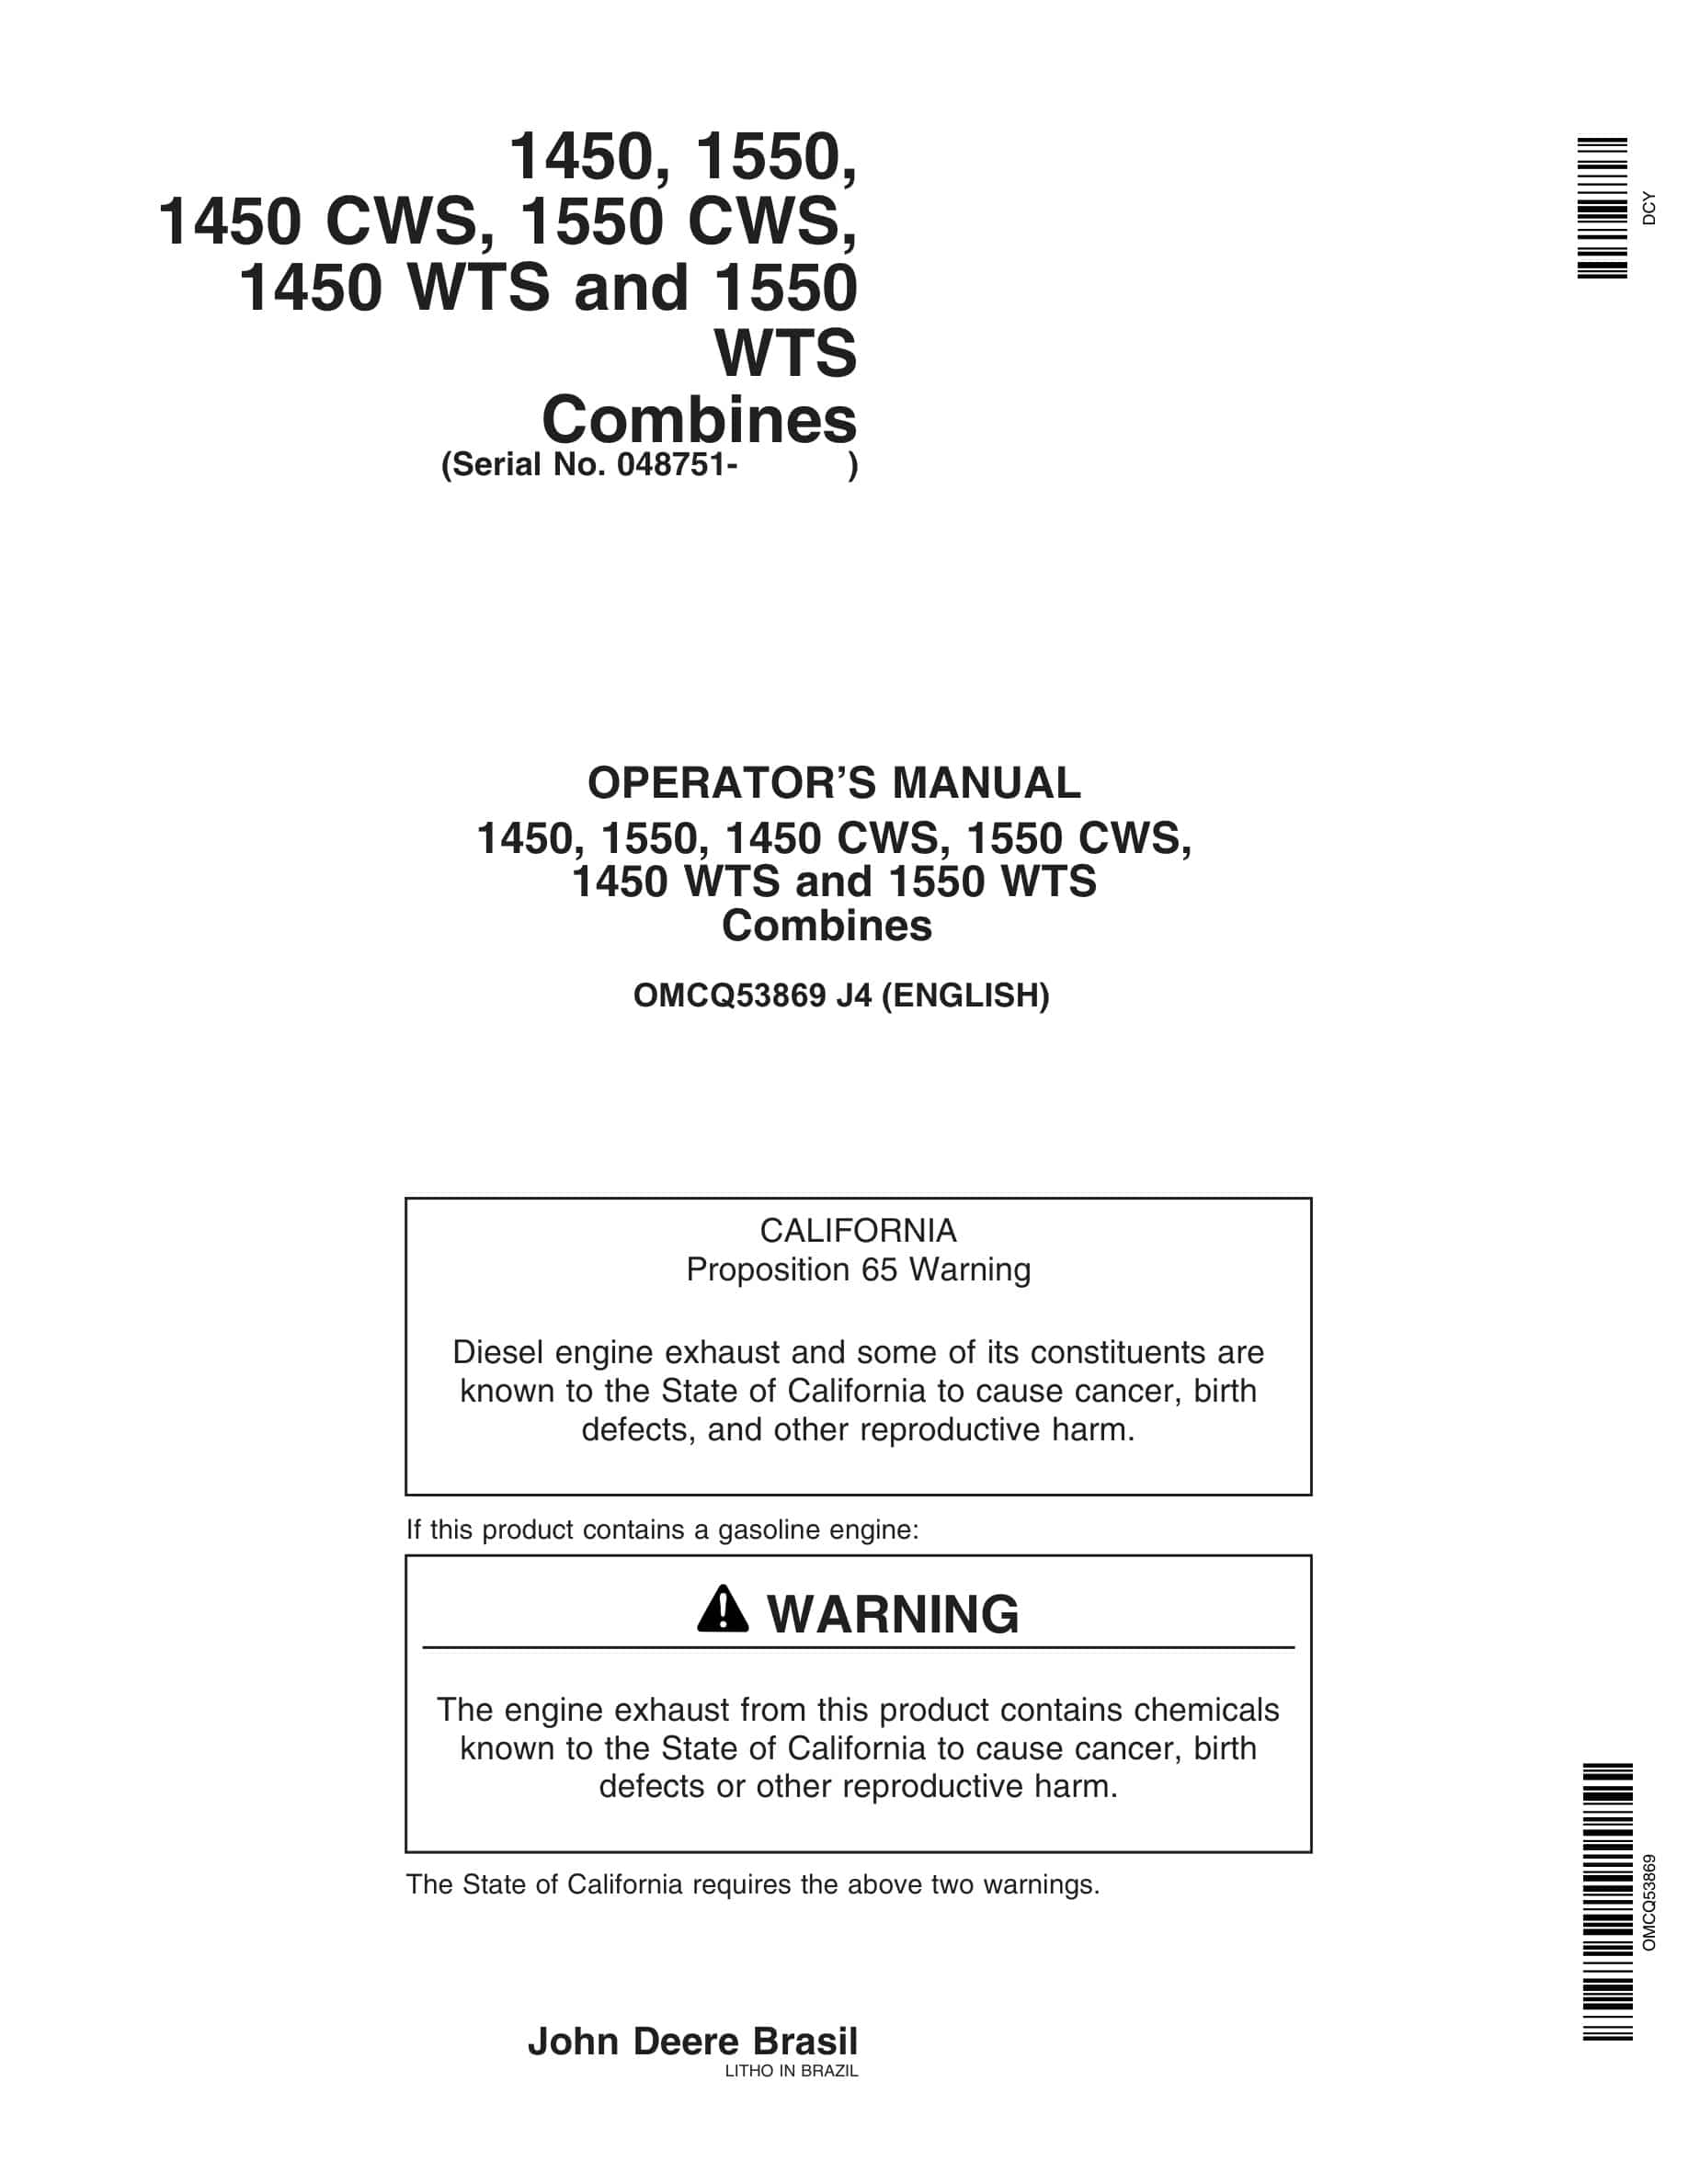 John Deere 1450, 1550, 1450 CWS, 1550 CWS, 1450 WTS and 1550 WTS Combine Operator Manual OMCQ53869-1